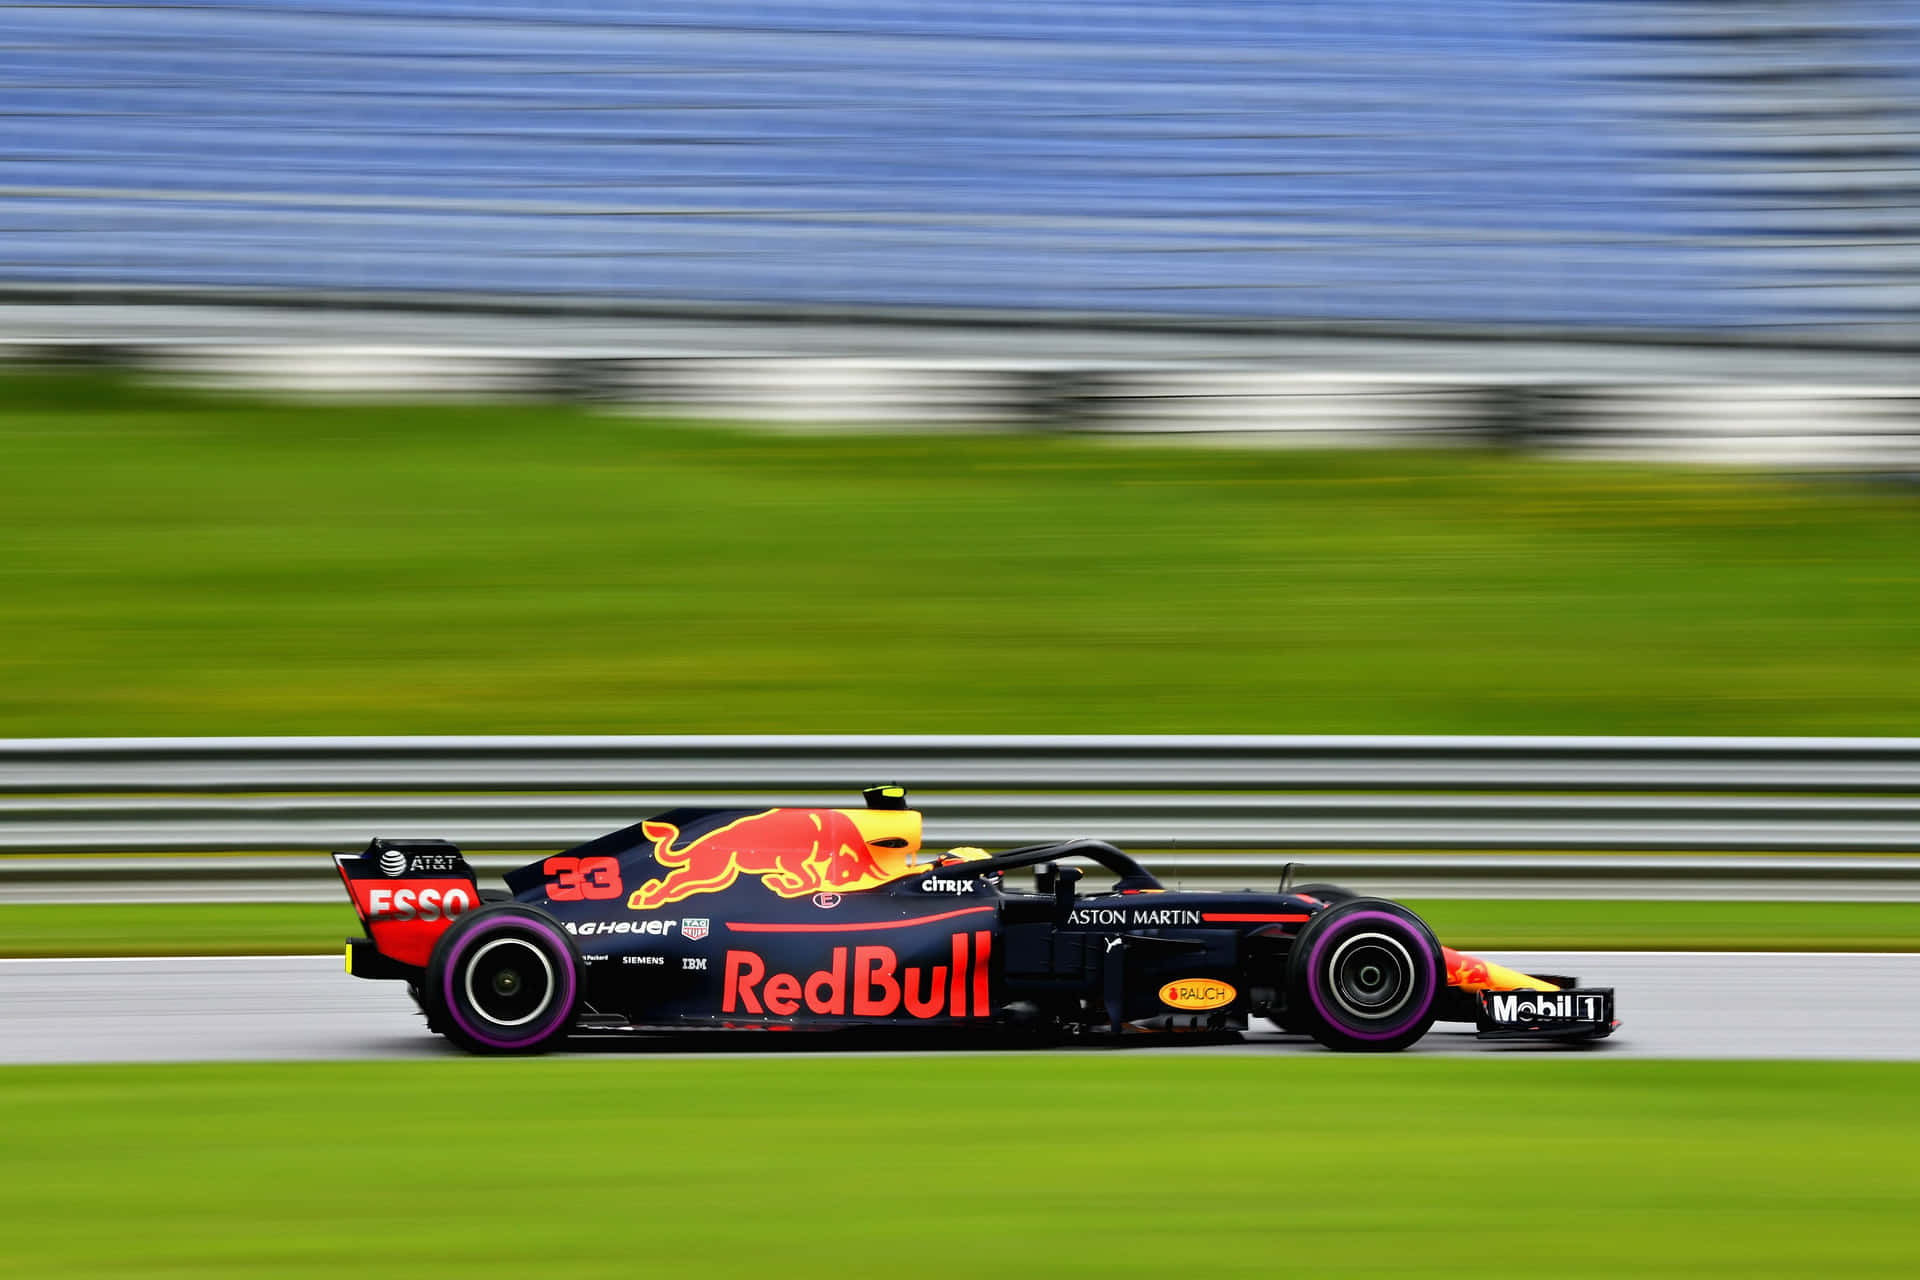 Max Verstappen racing on the Formula 1 track in his Red Bull car